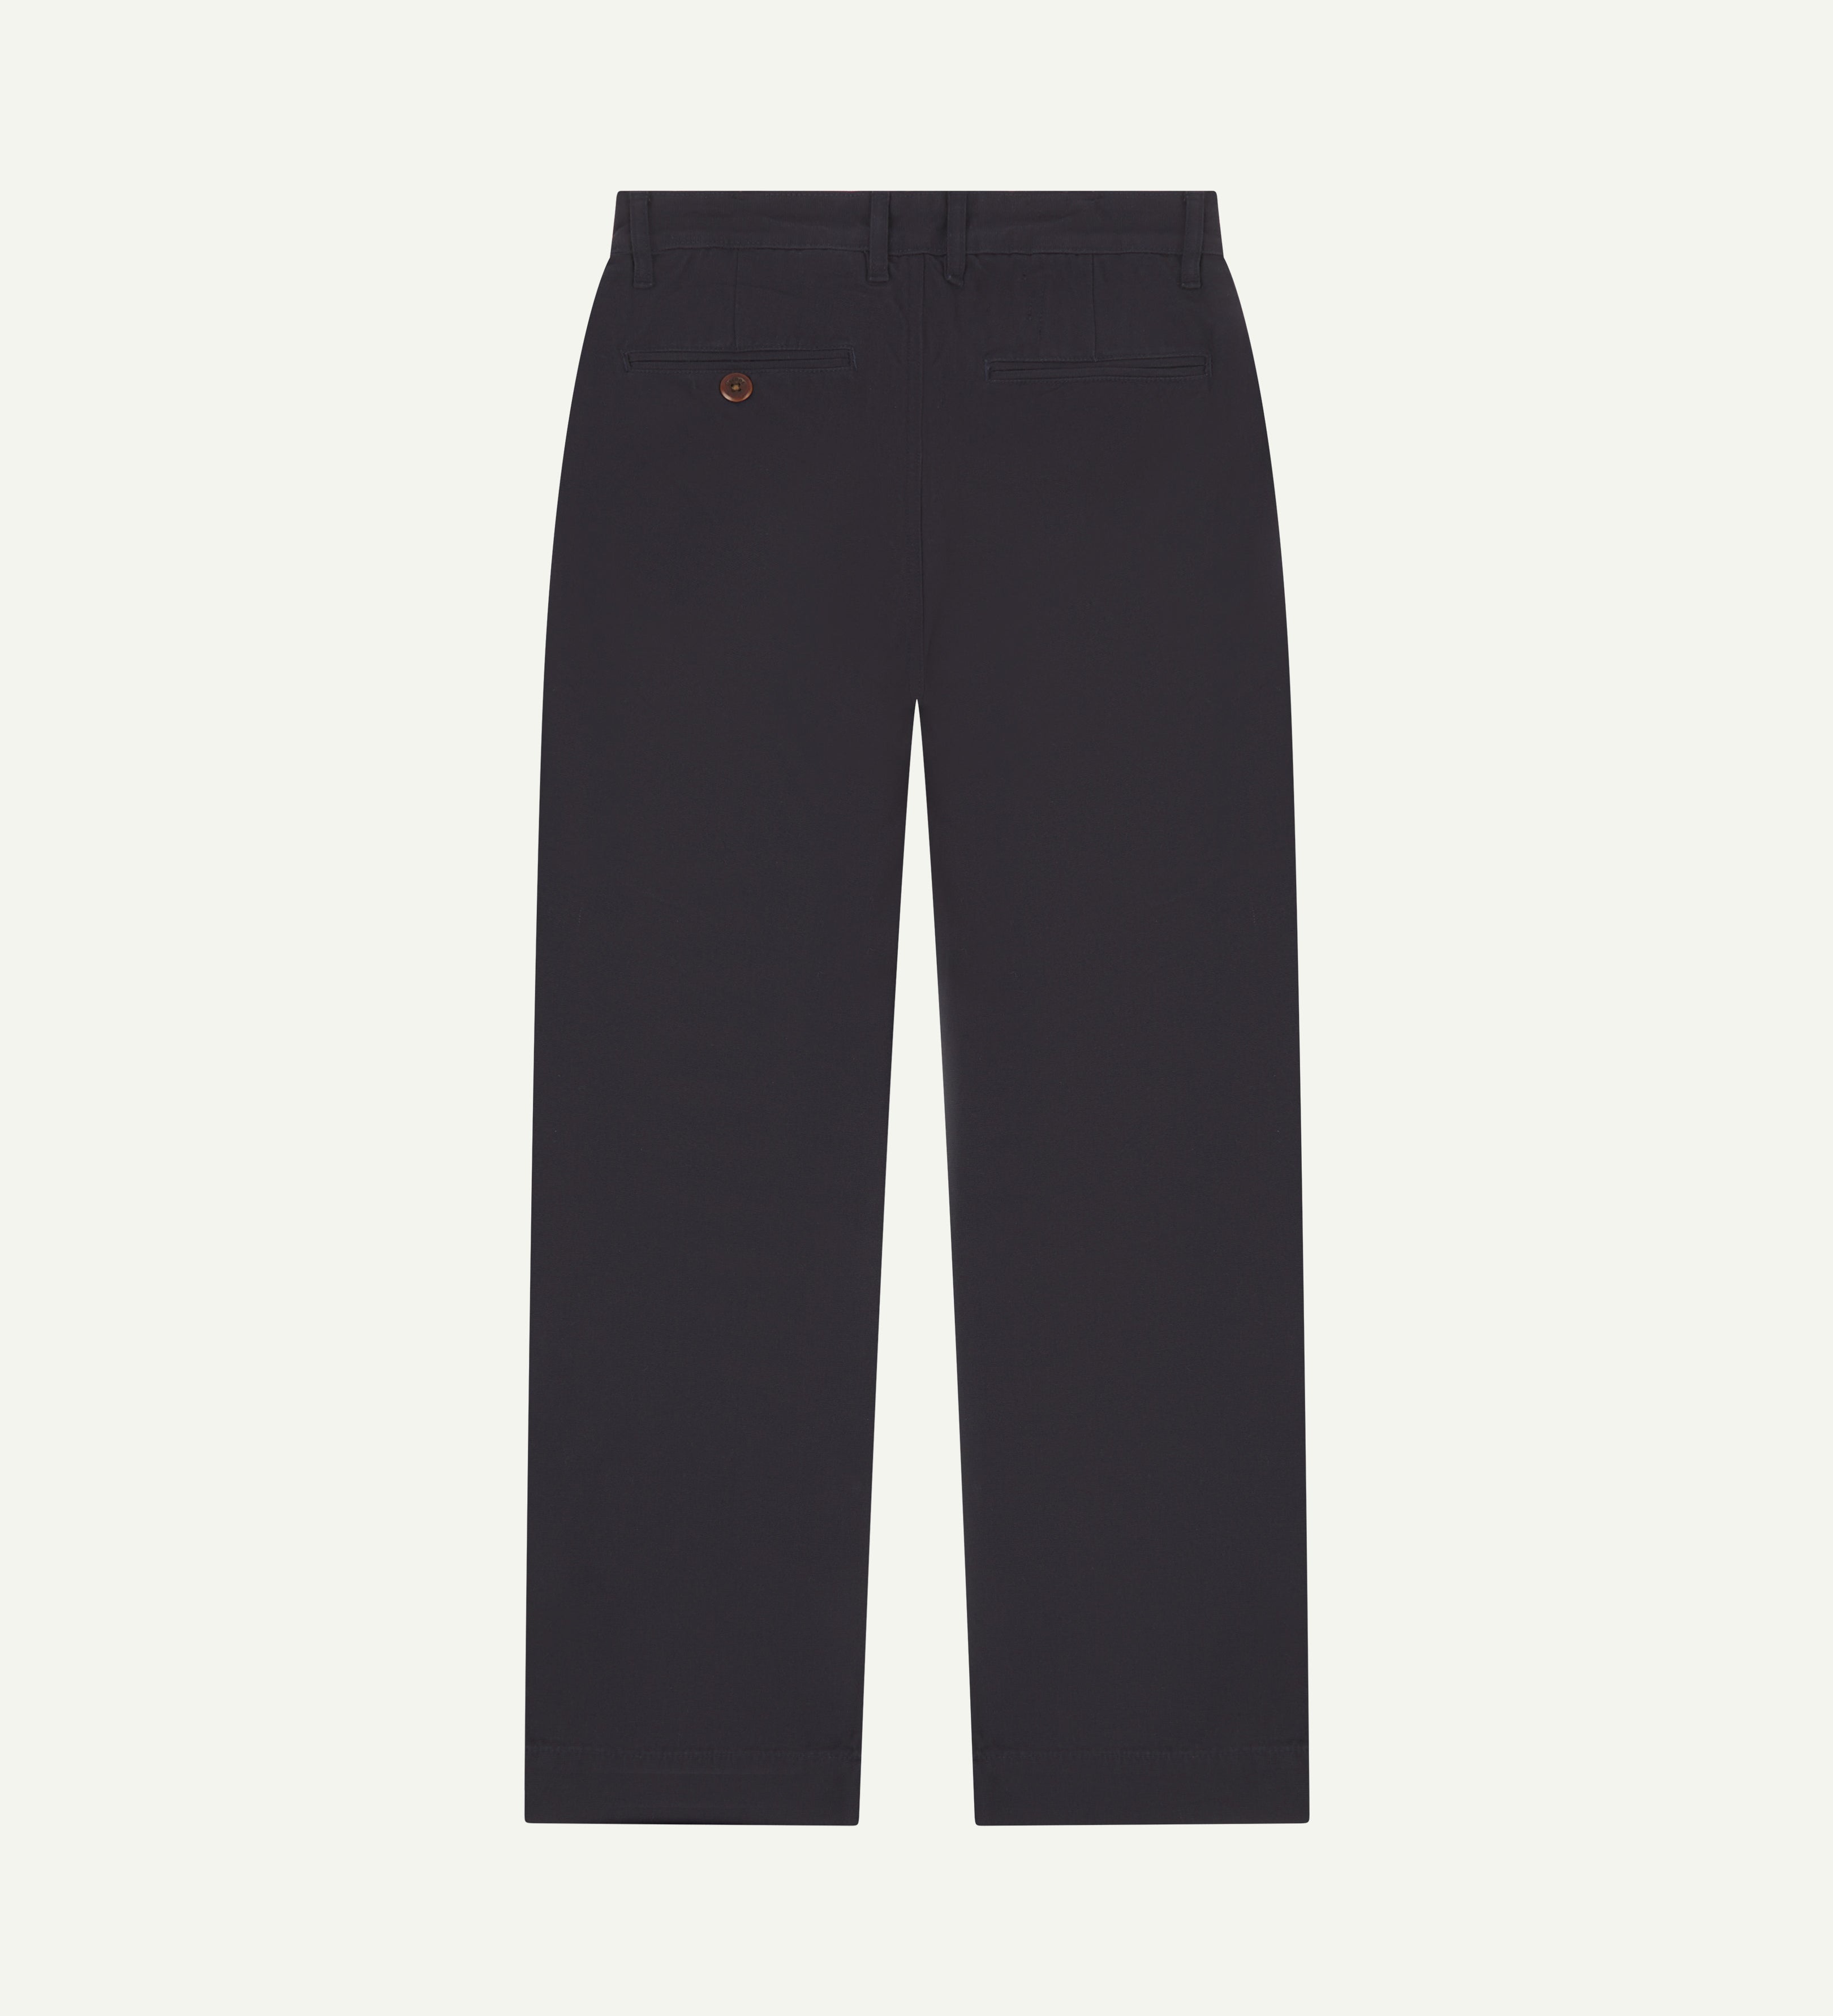 Back view of #5018 Uskees men's organic mid-weight cotton boat trousers in navy blue showing wide leg style and buttoned back pocket.